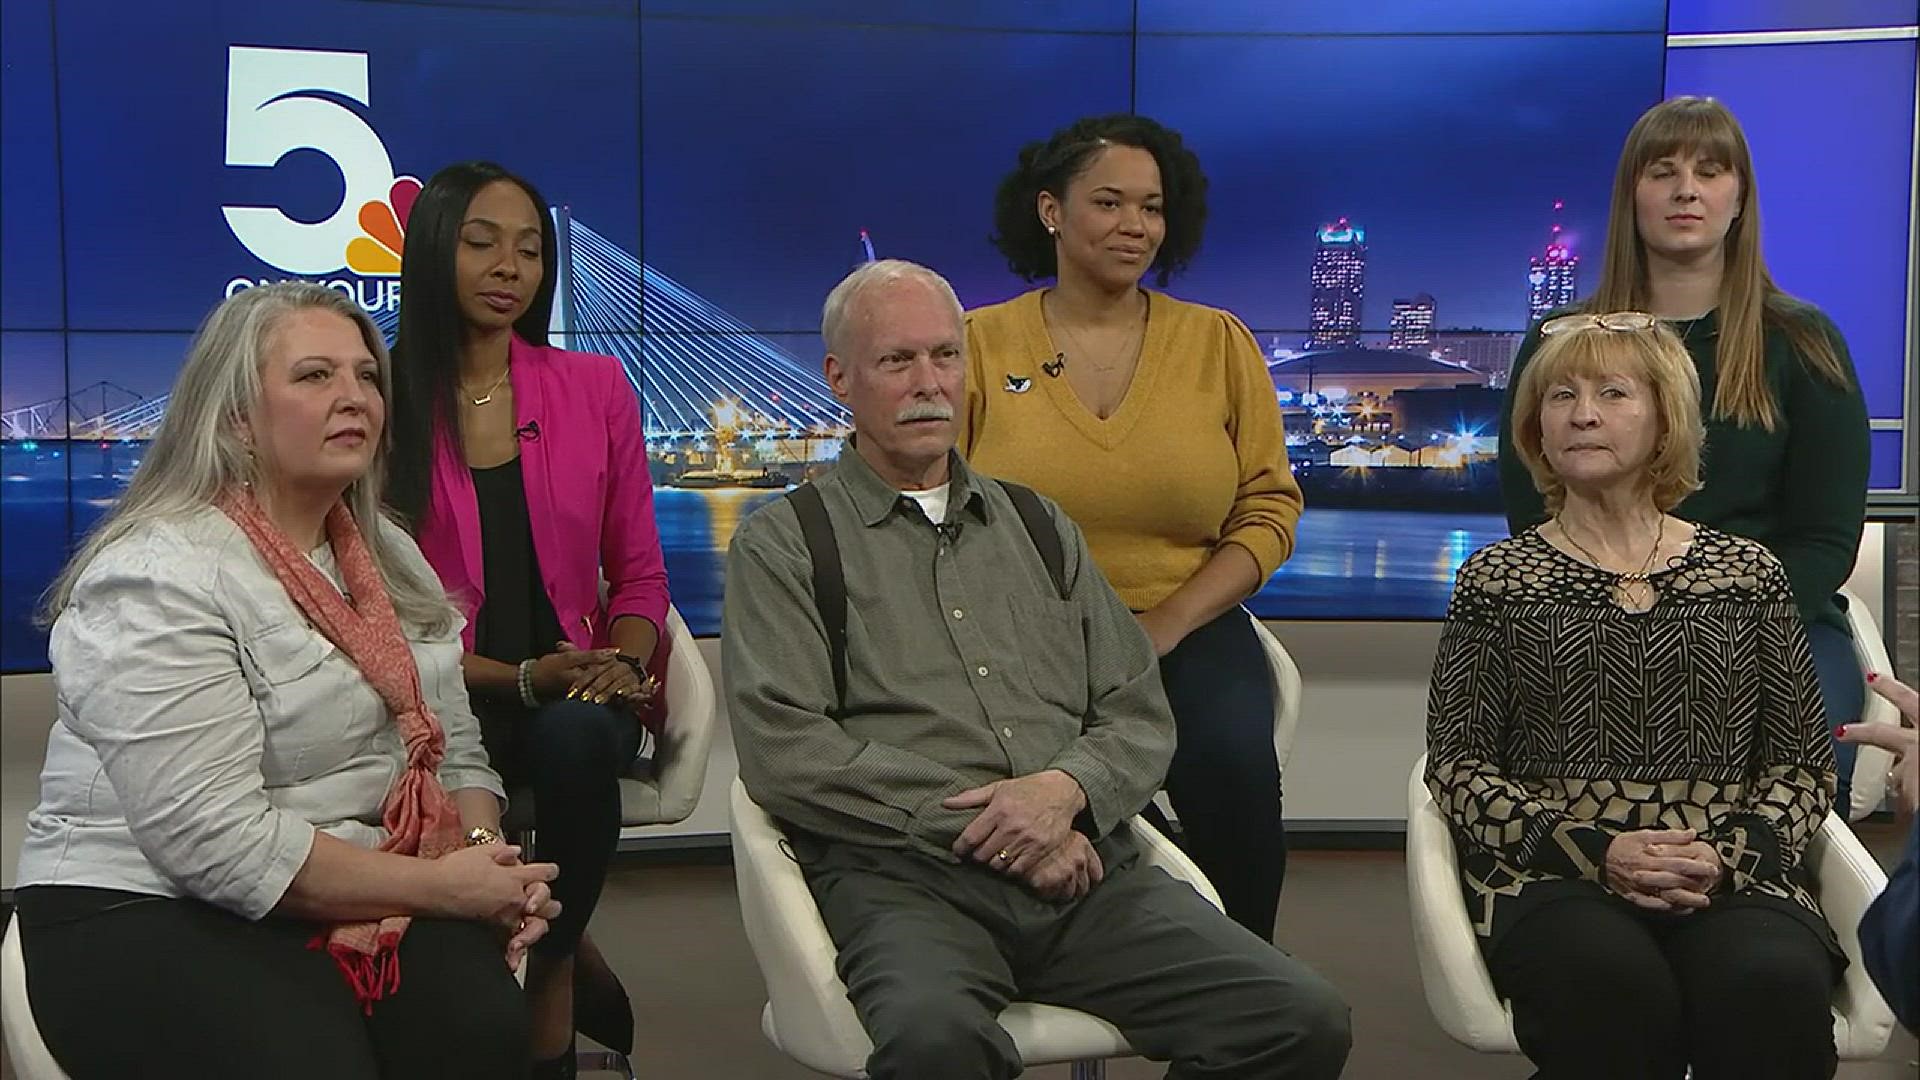 5 On Your Side got a panel of boomers and millennials together to share their thoughts on the contentious relationship between the generations.